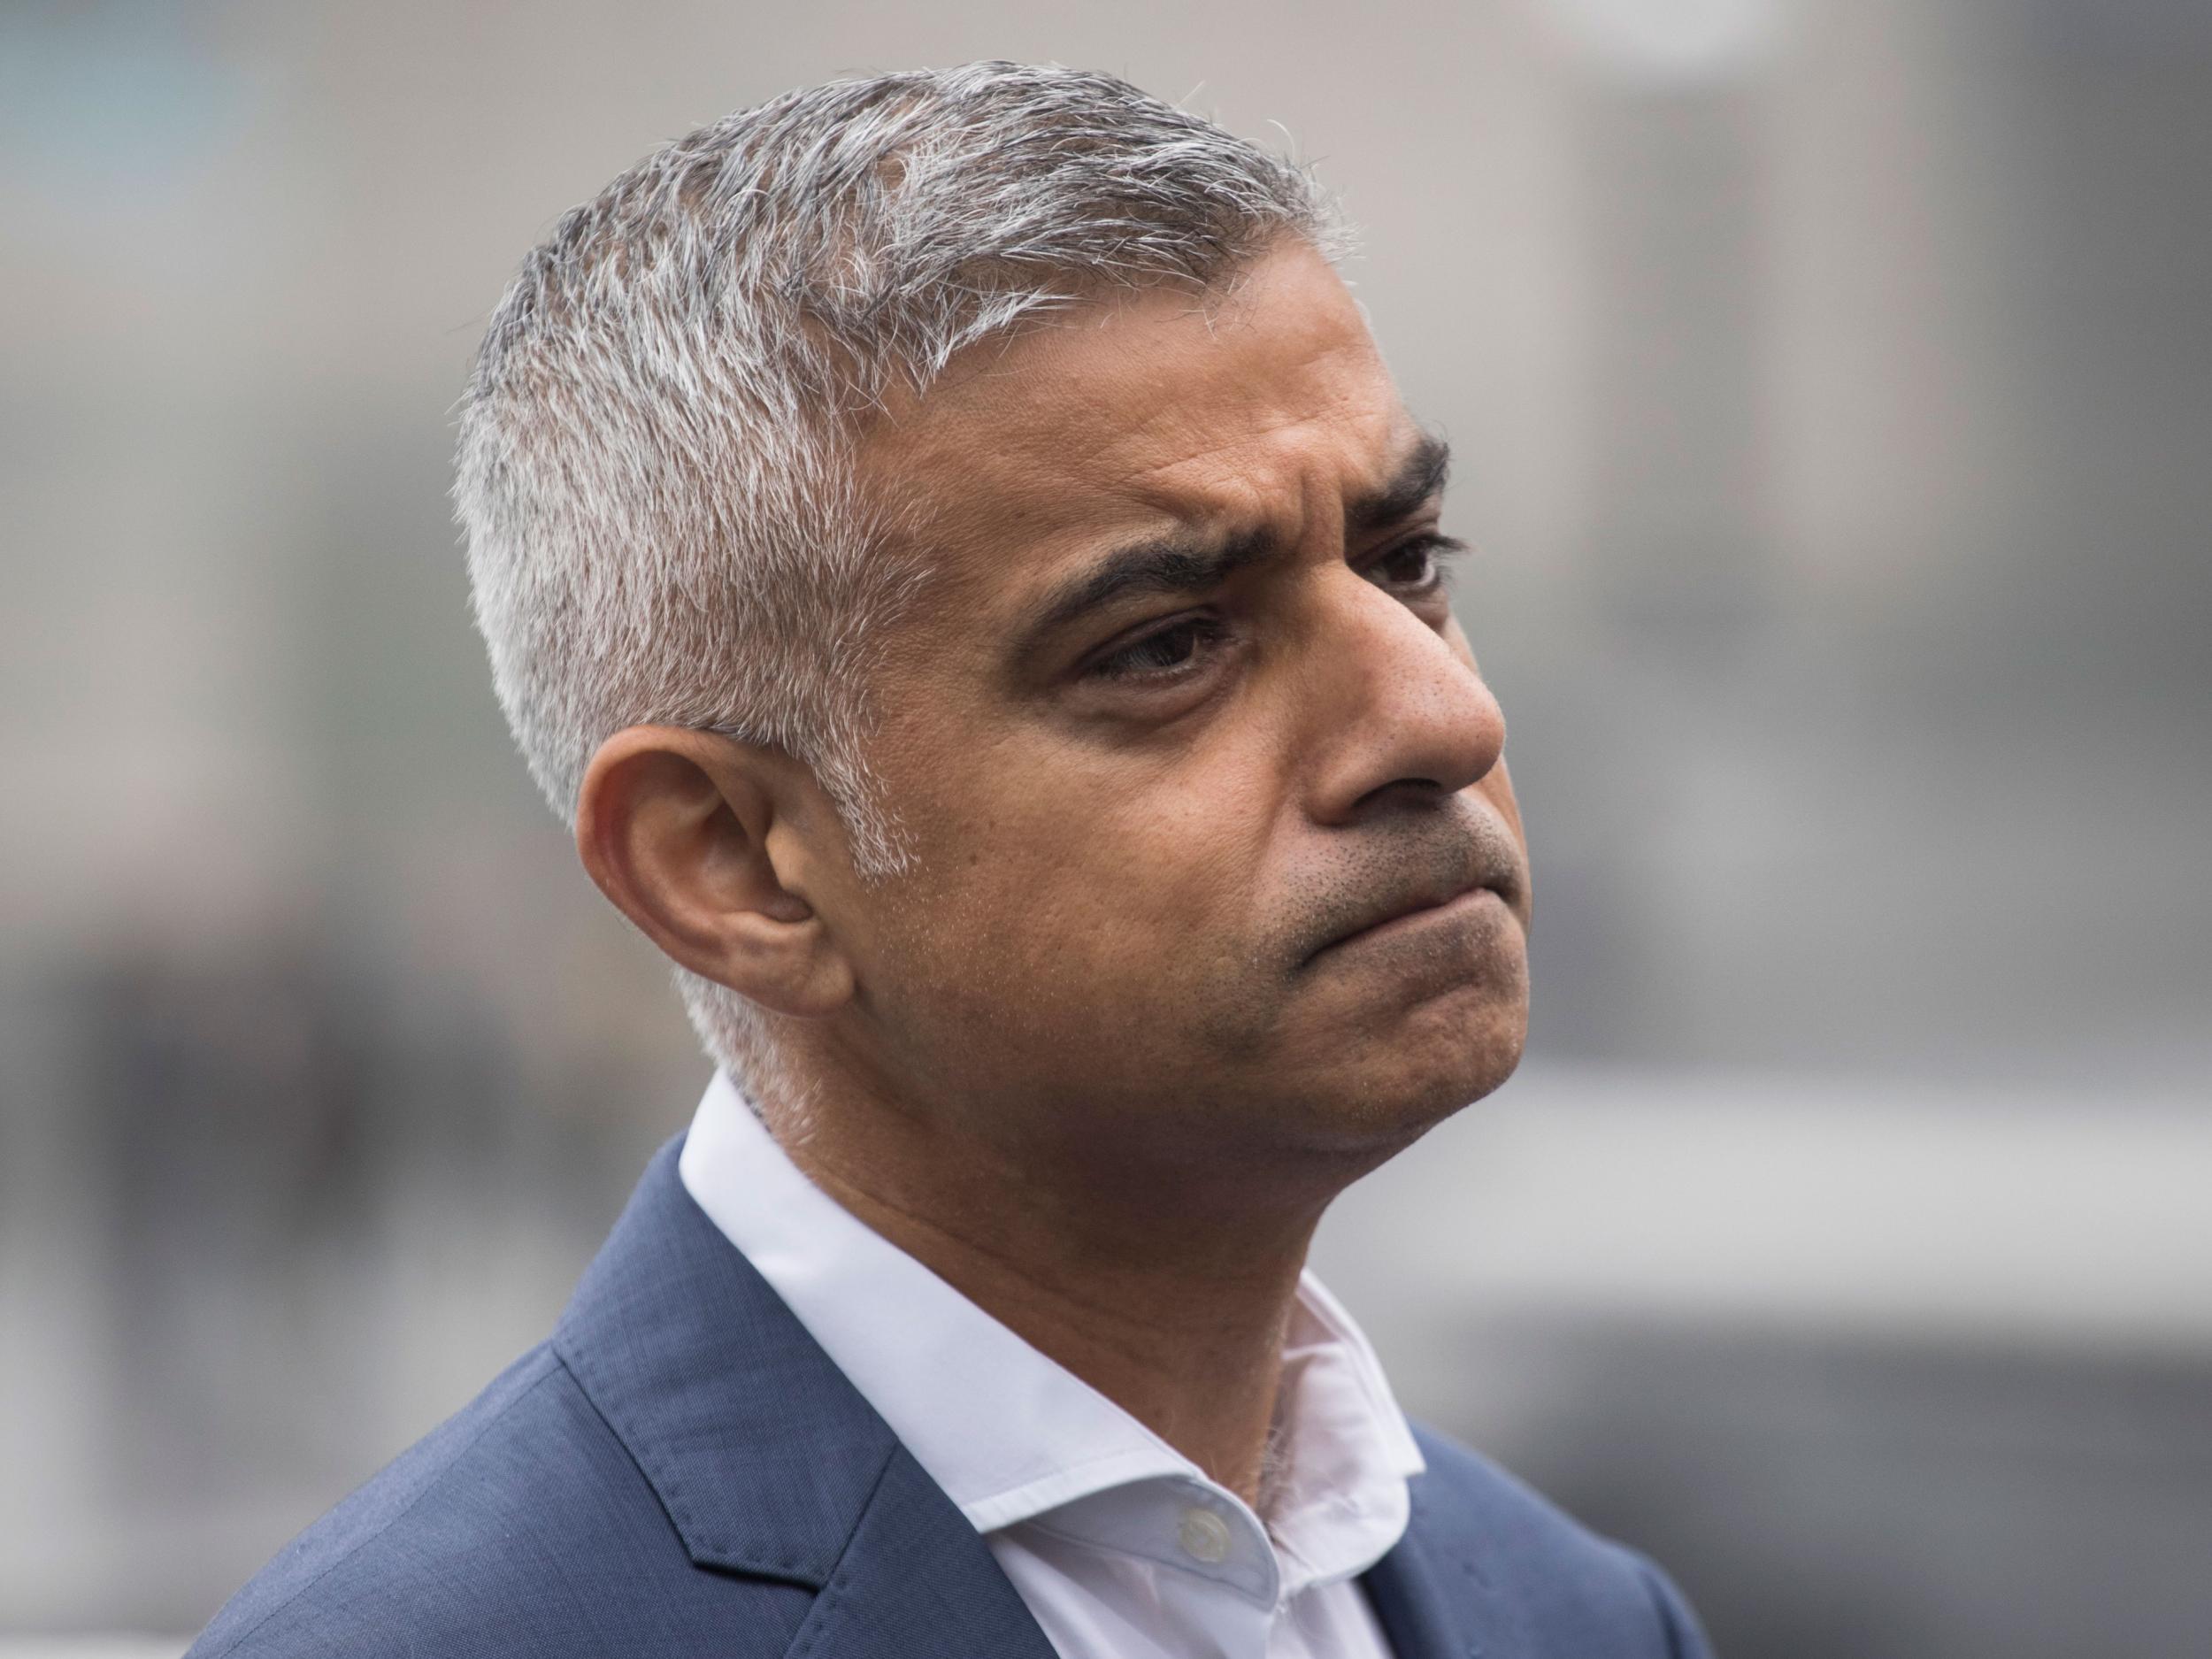 Sadiq Khan is concerned for the fate of Dulwich Hamlet